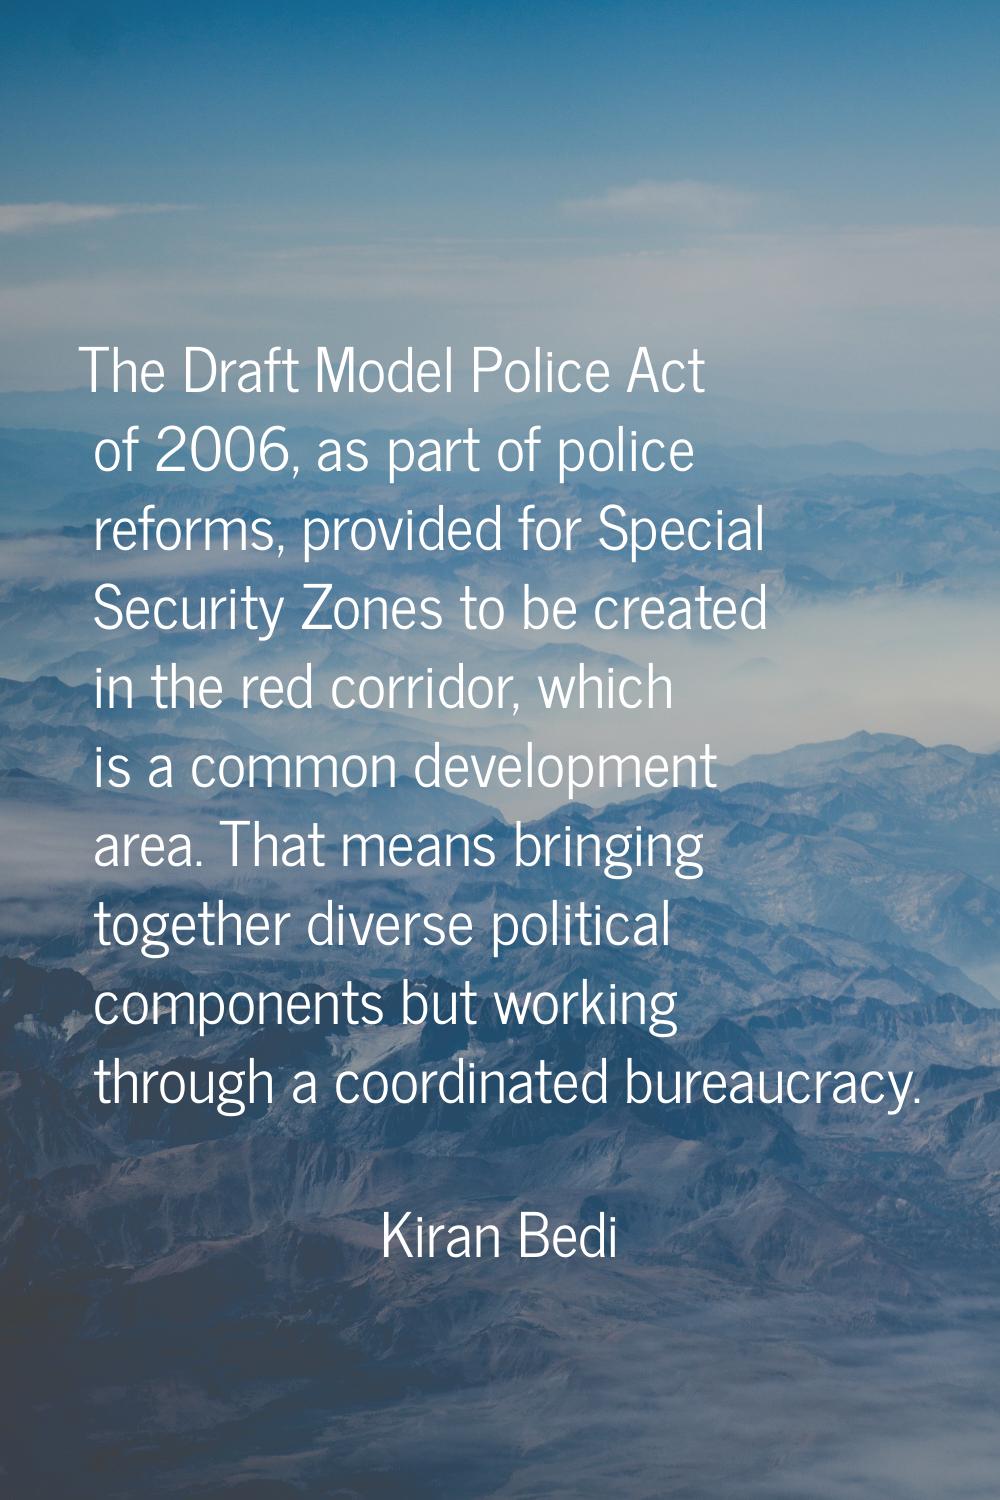 The Draft Model Police Act of 2006, as part of police reforms, provided for Special Security Zones 